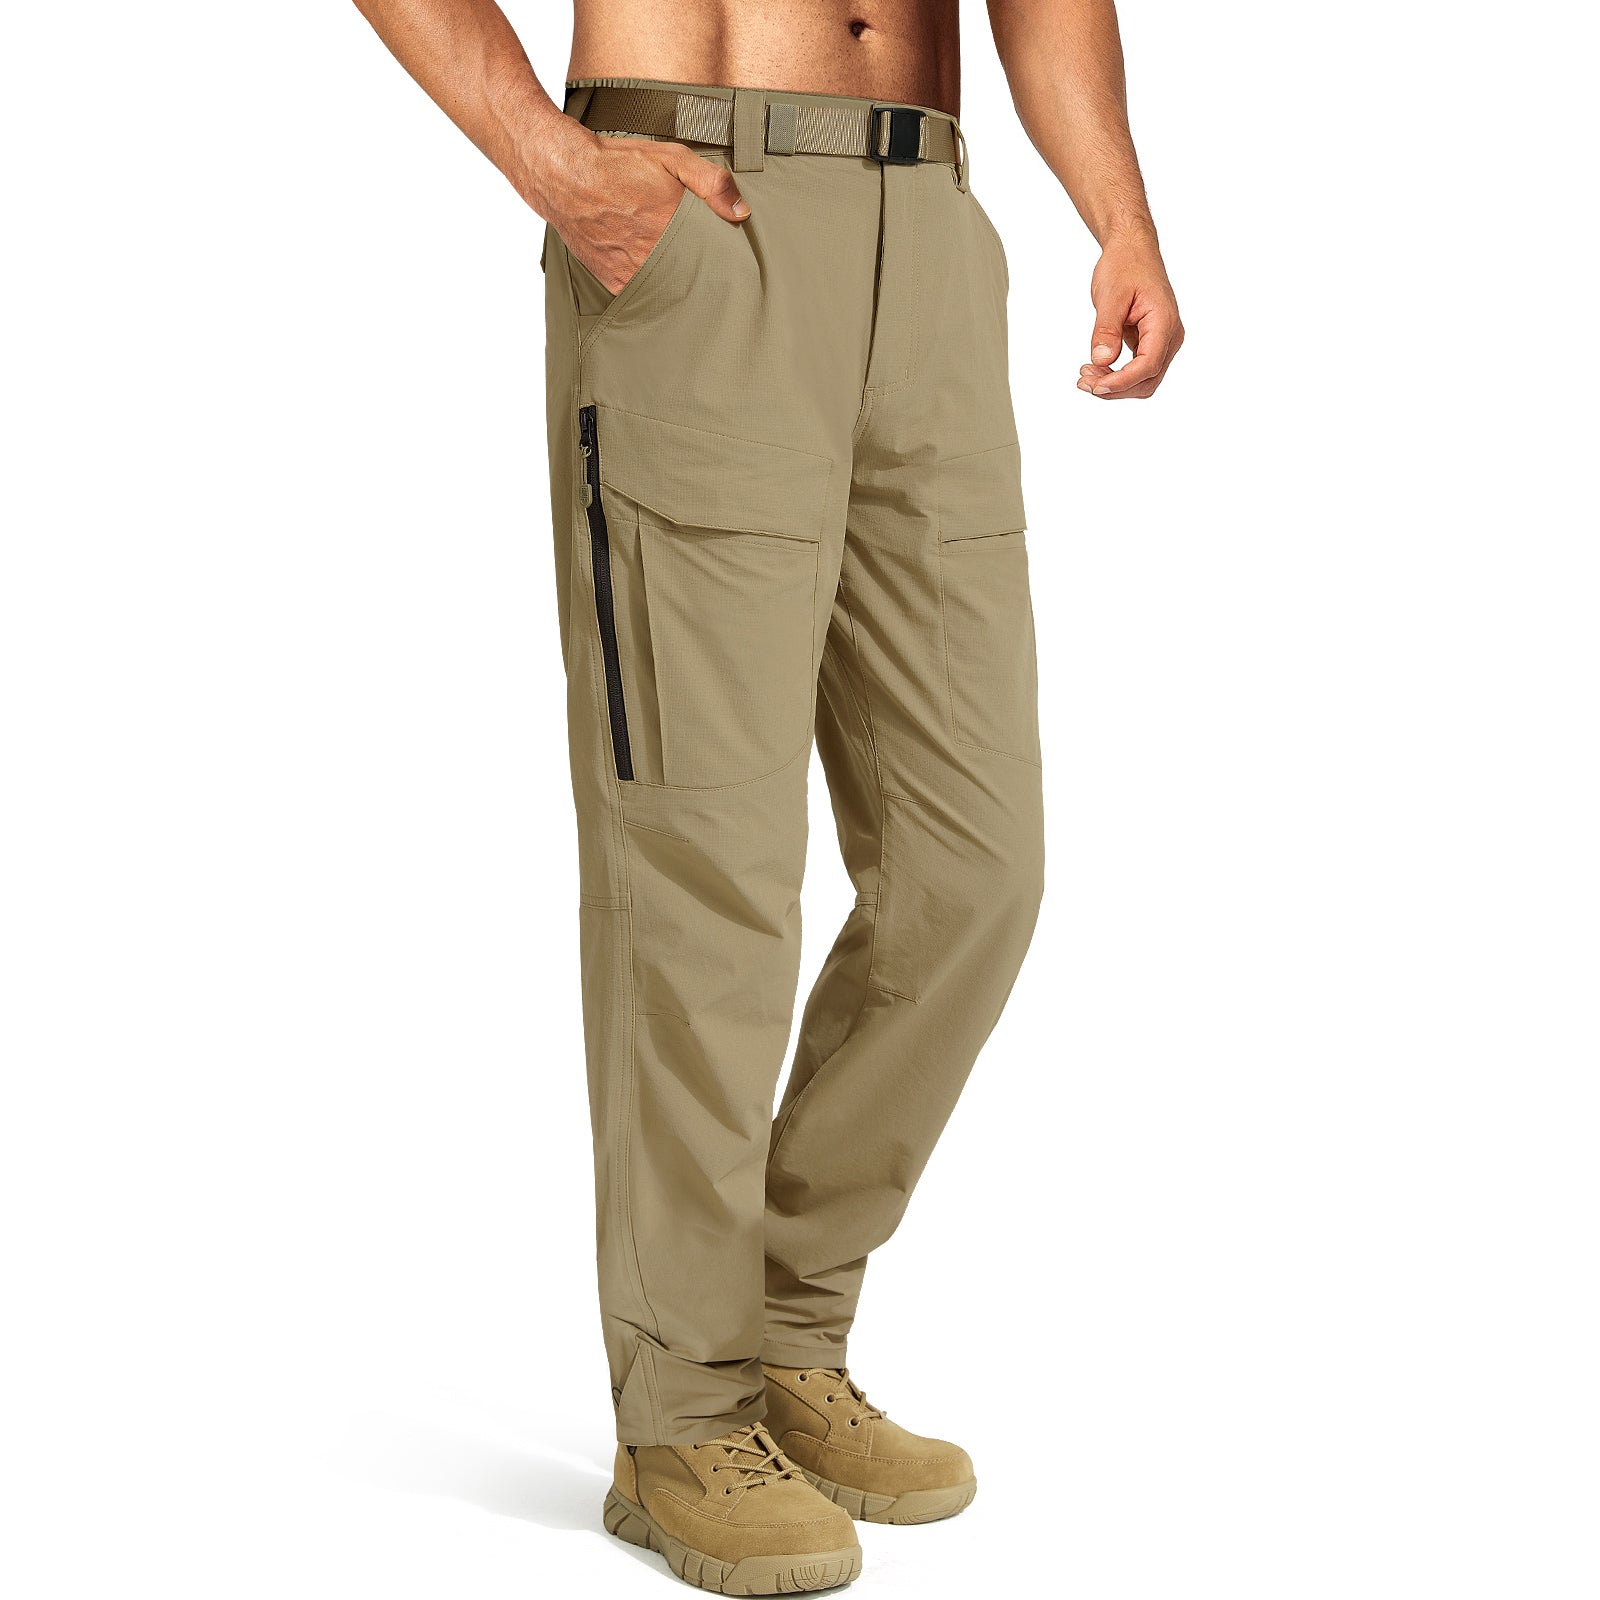 MIER Men's Hiking Pants Lightweight Stretchy Cargo Pants